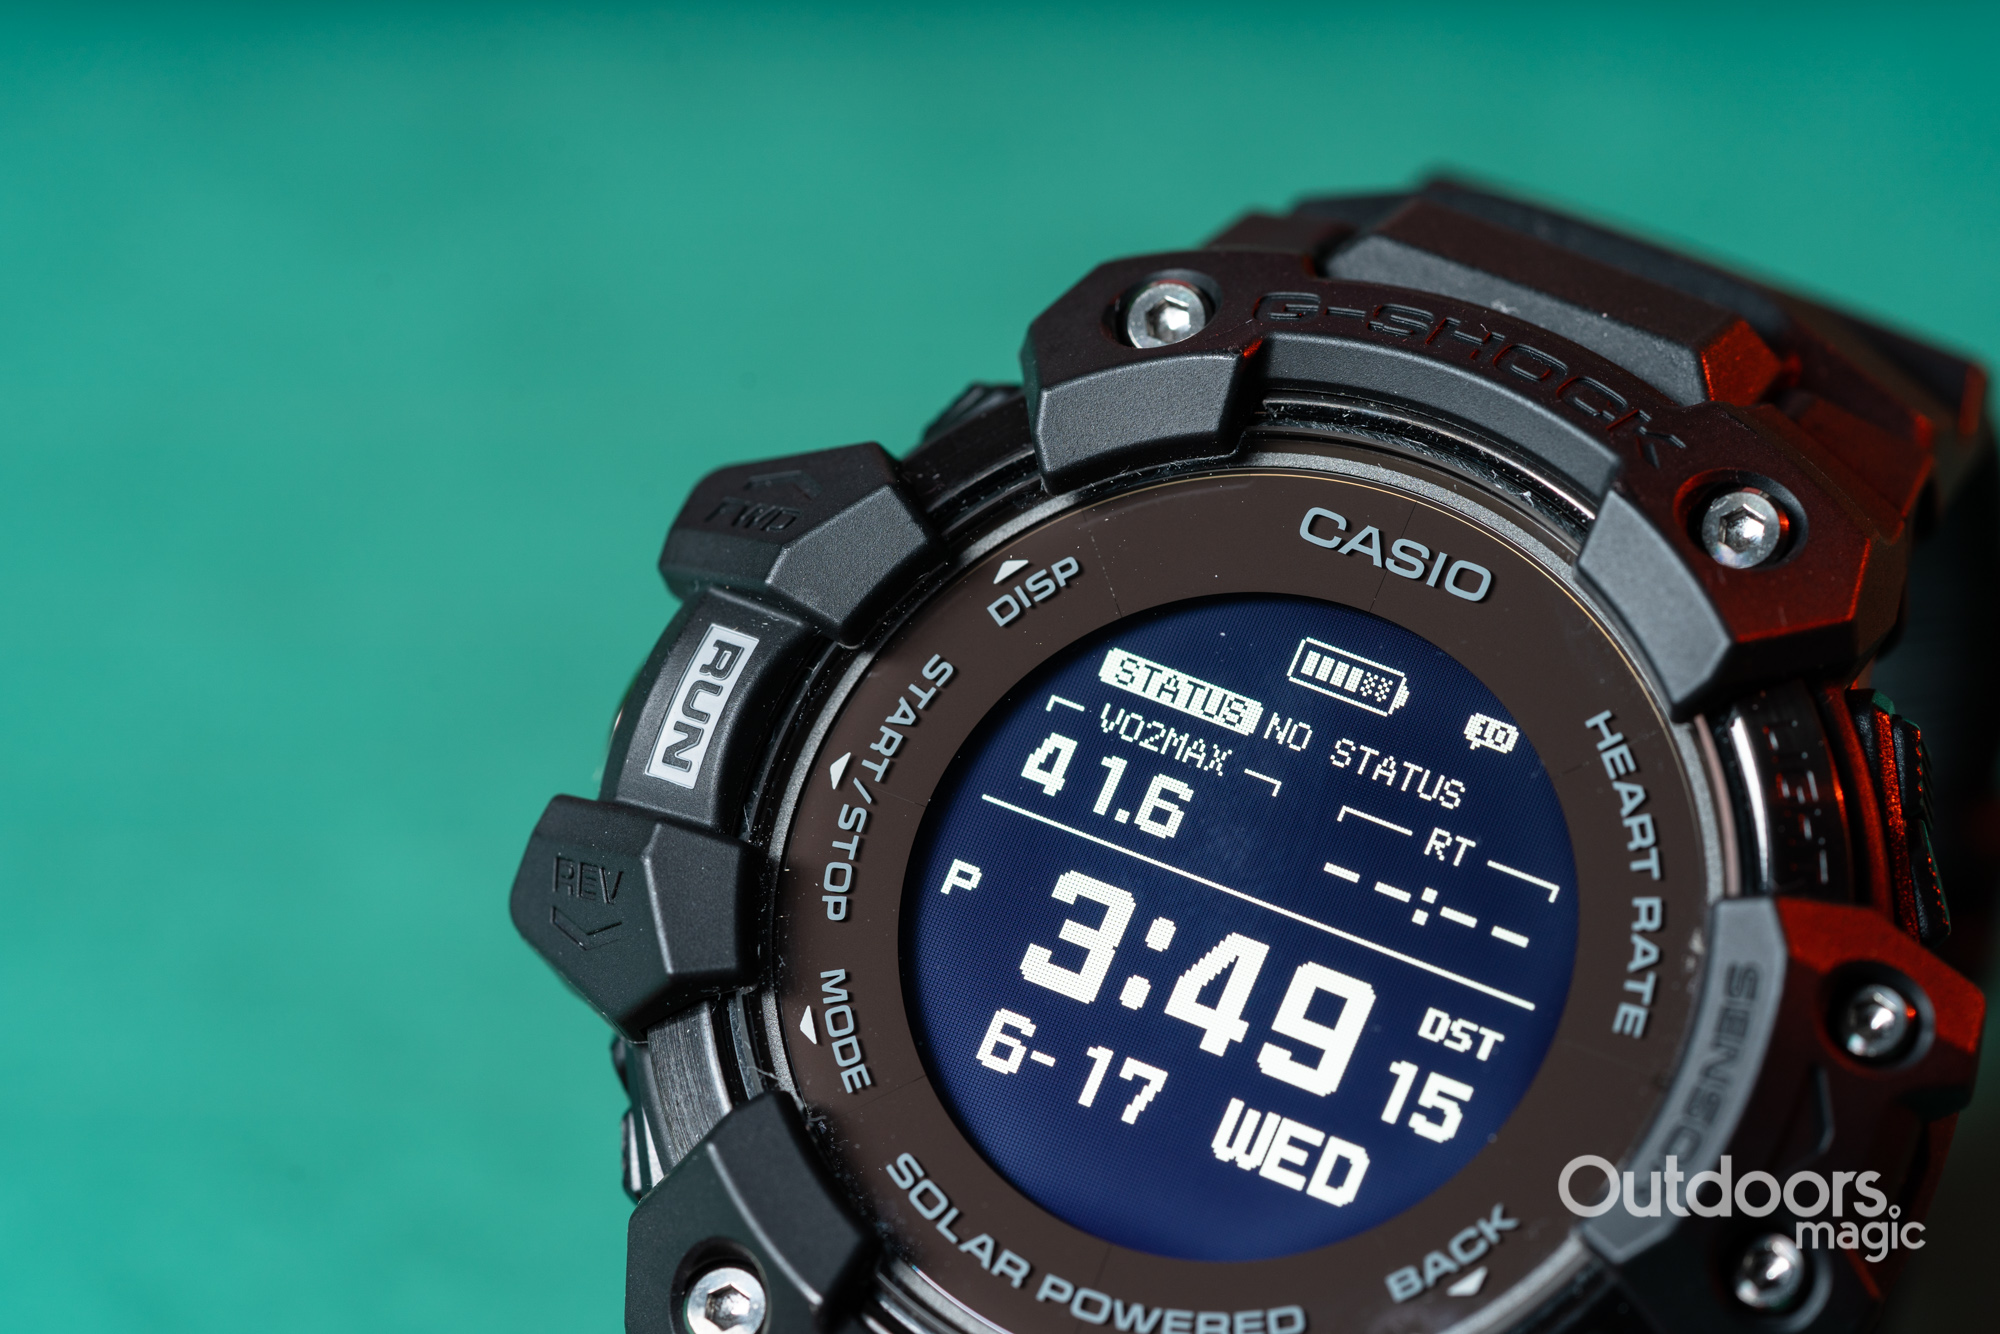 Casio G-Shock GBD-H1000-1 Heart Rate Monitor Review